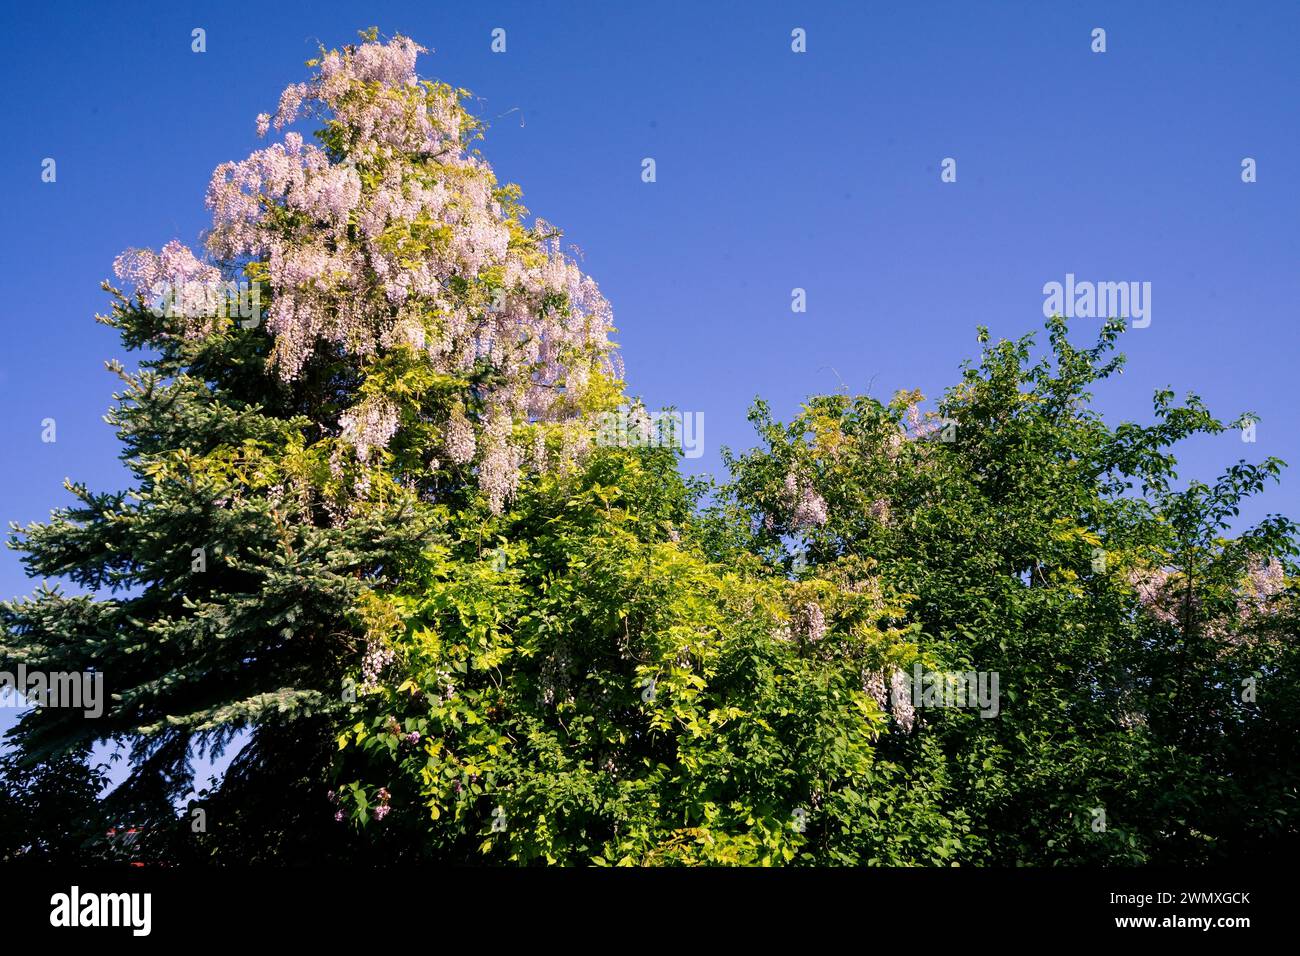 Flowering trees under a clear blue sky on a sunny day wisterias (Wisteria) on spruce Picea Stock Photo